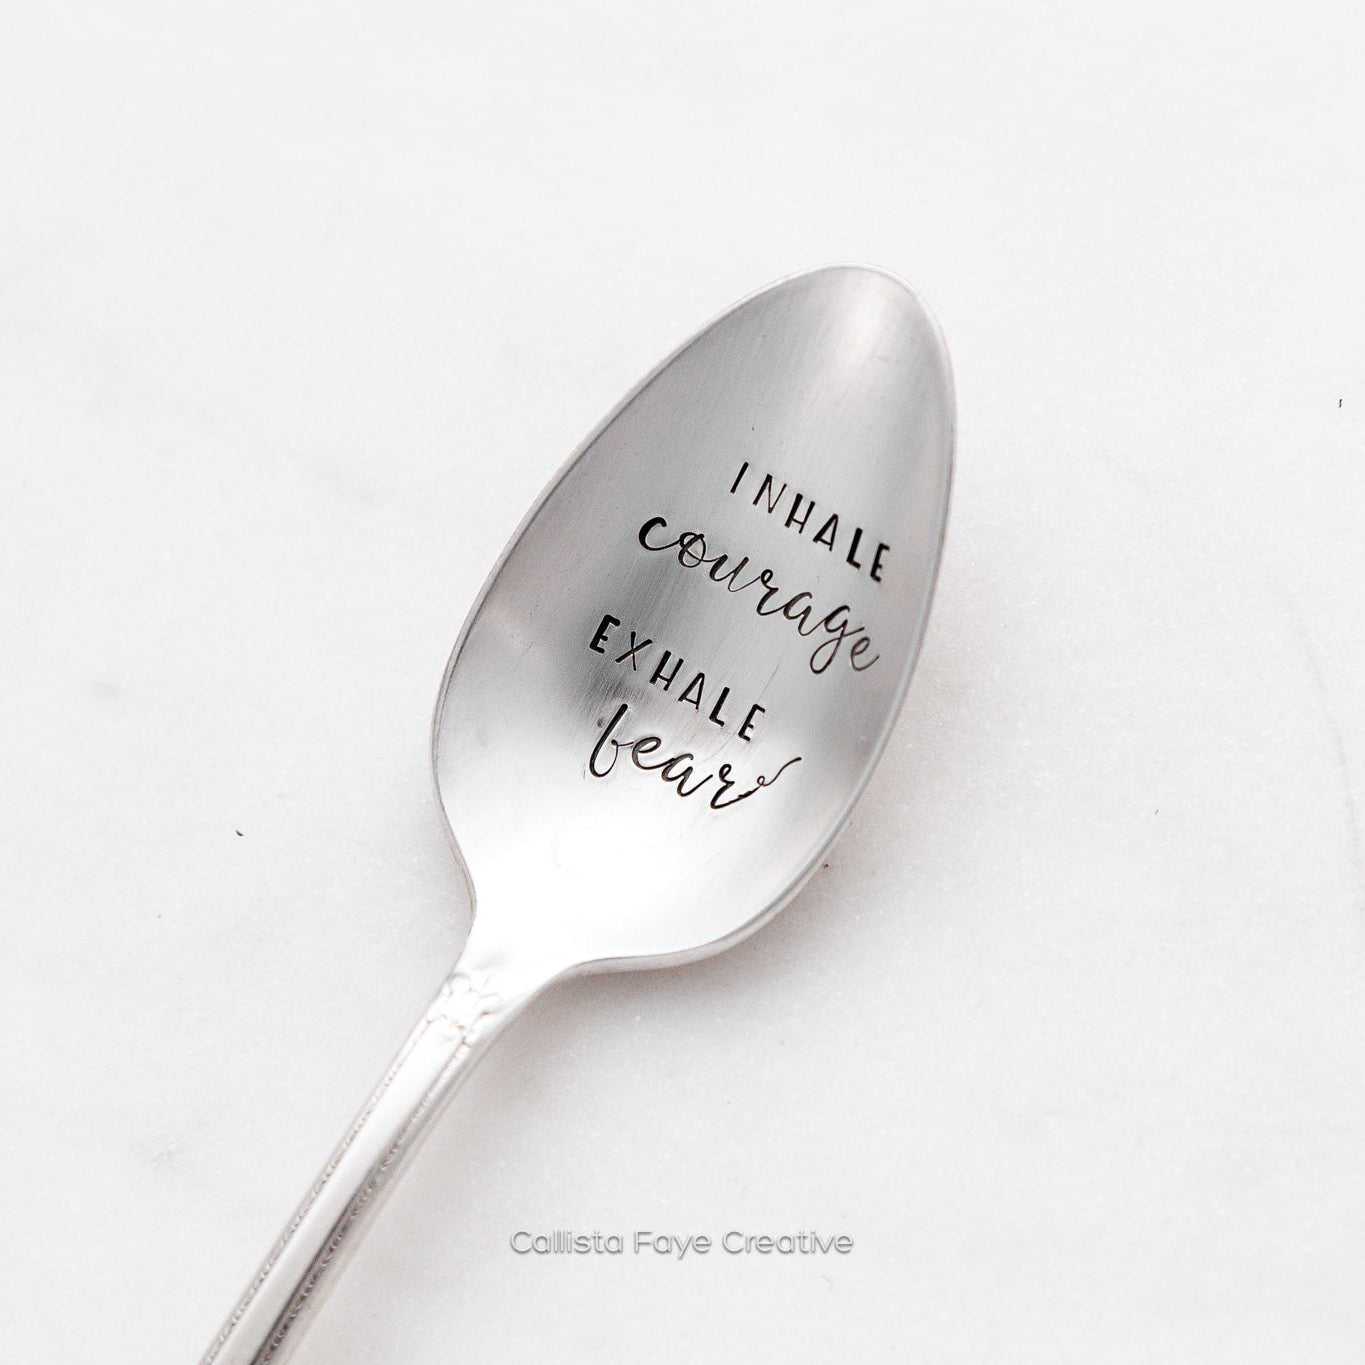 Inhale Courage Exhale Fear, Hand Stamped Vintage Spoon Spoons callistafaye   